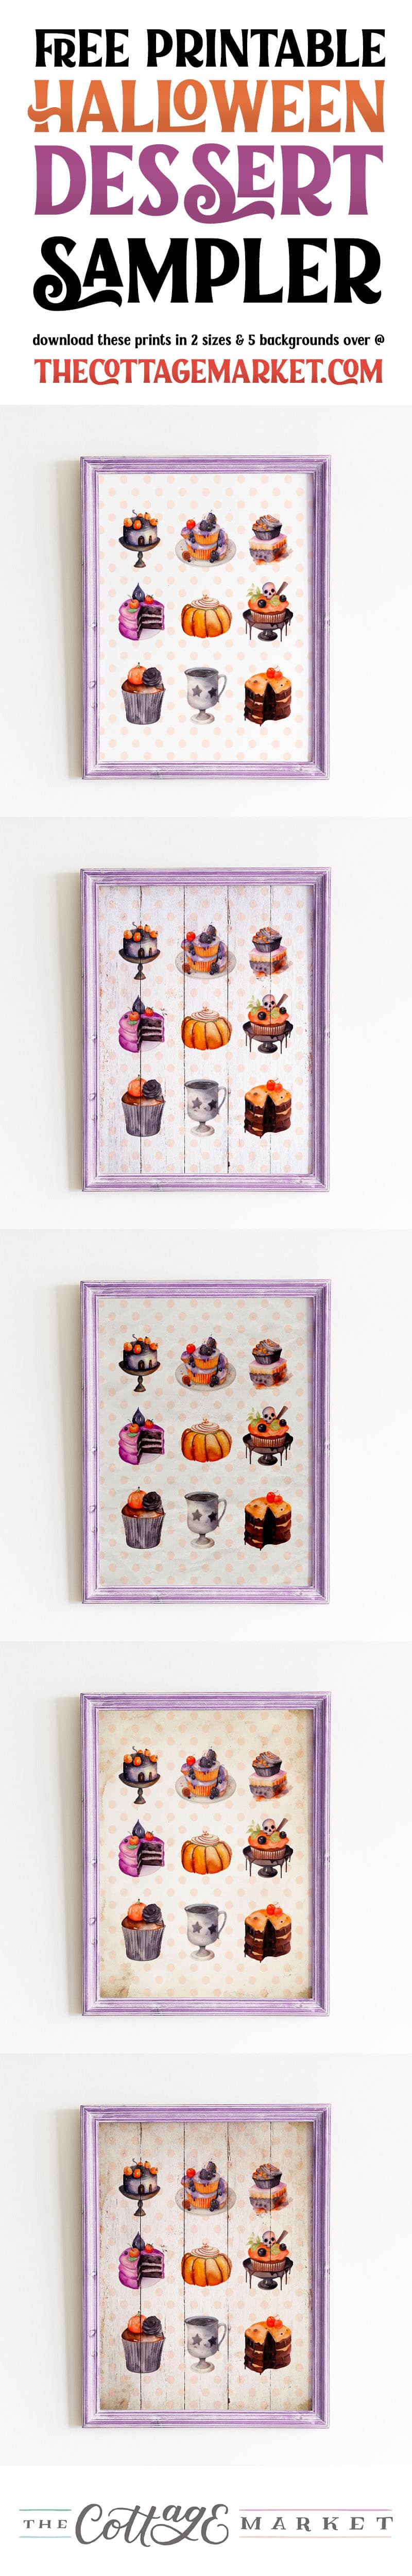 Sweeten your Halloween with our Free Printable Dessert Sampler! Customize your spooky treats. Download now! 